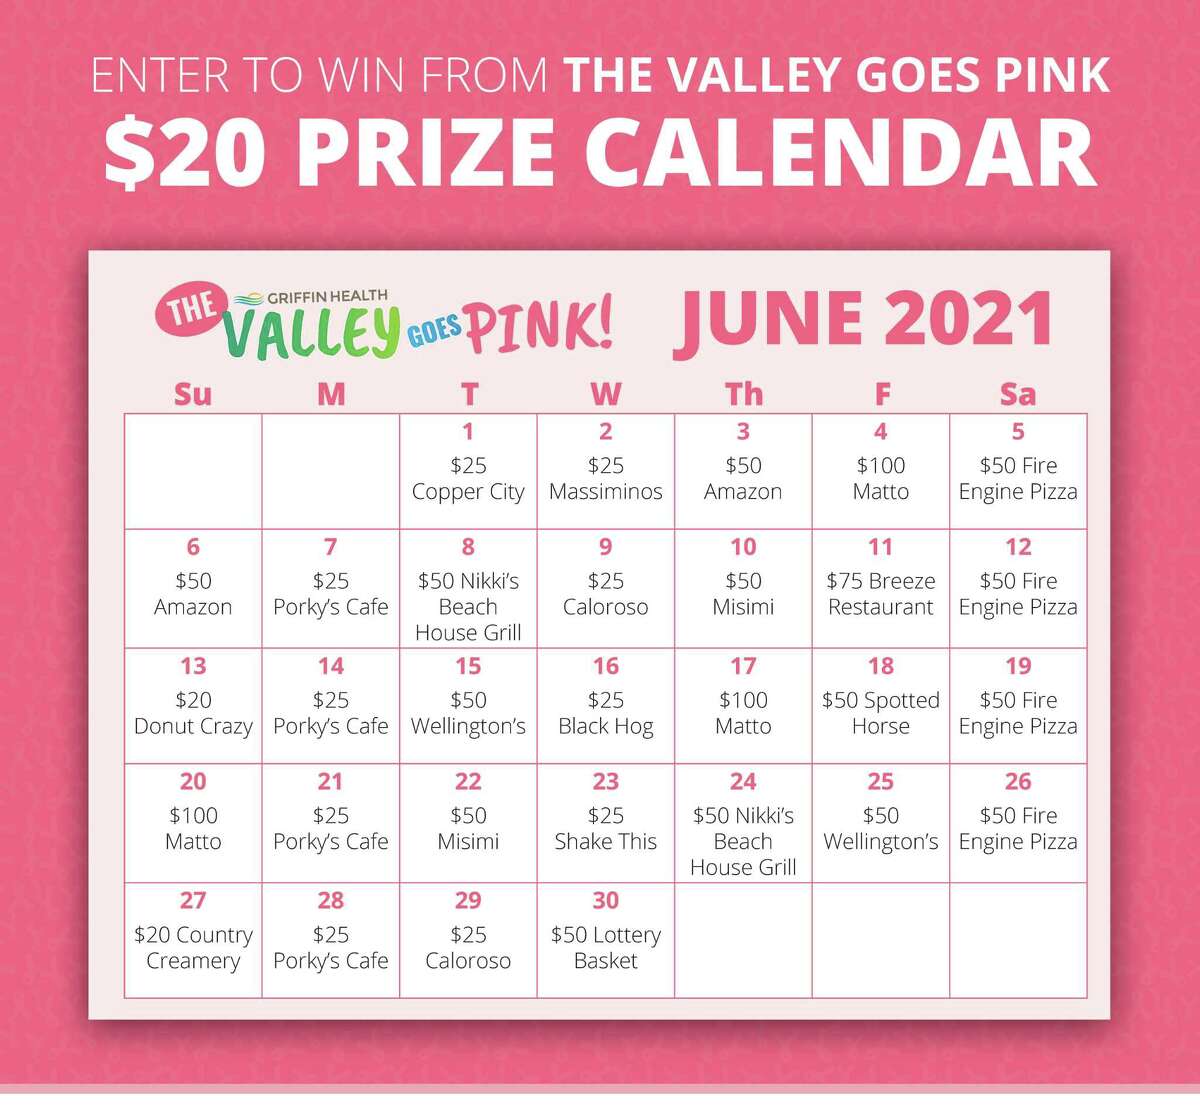 The Valley Goes Pink Campaign is holding a prize calendar fundraiser throughout June.